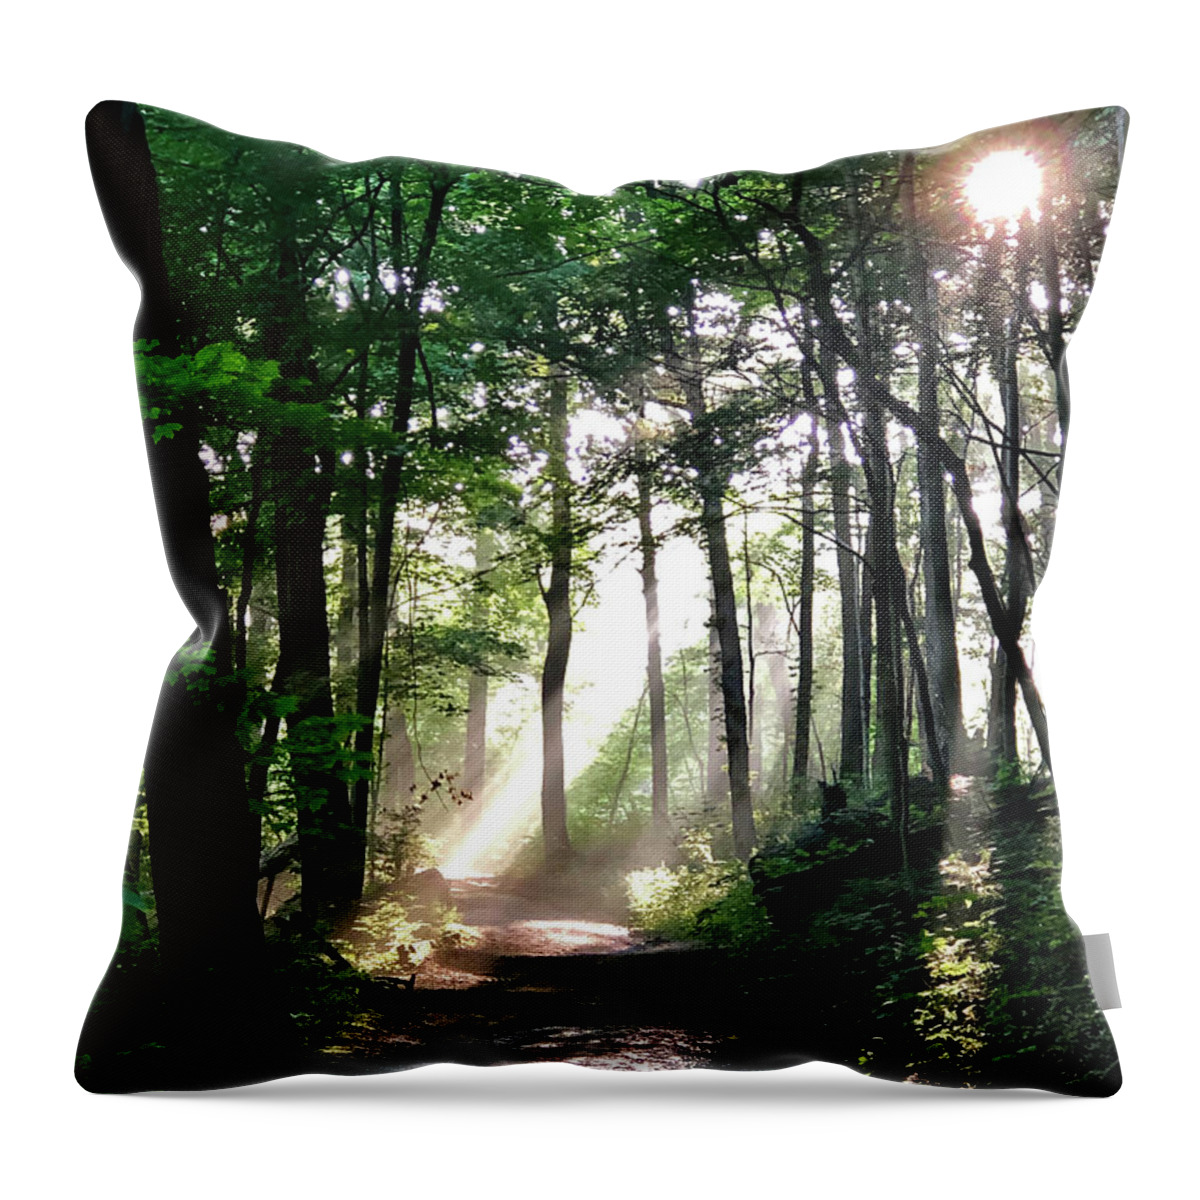 Solstice Throw Pillow featuring the photograph Summer Soltice Morning by Paula Guttilla